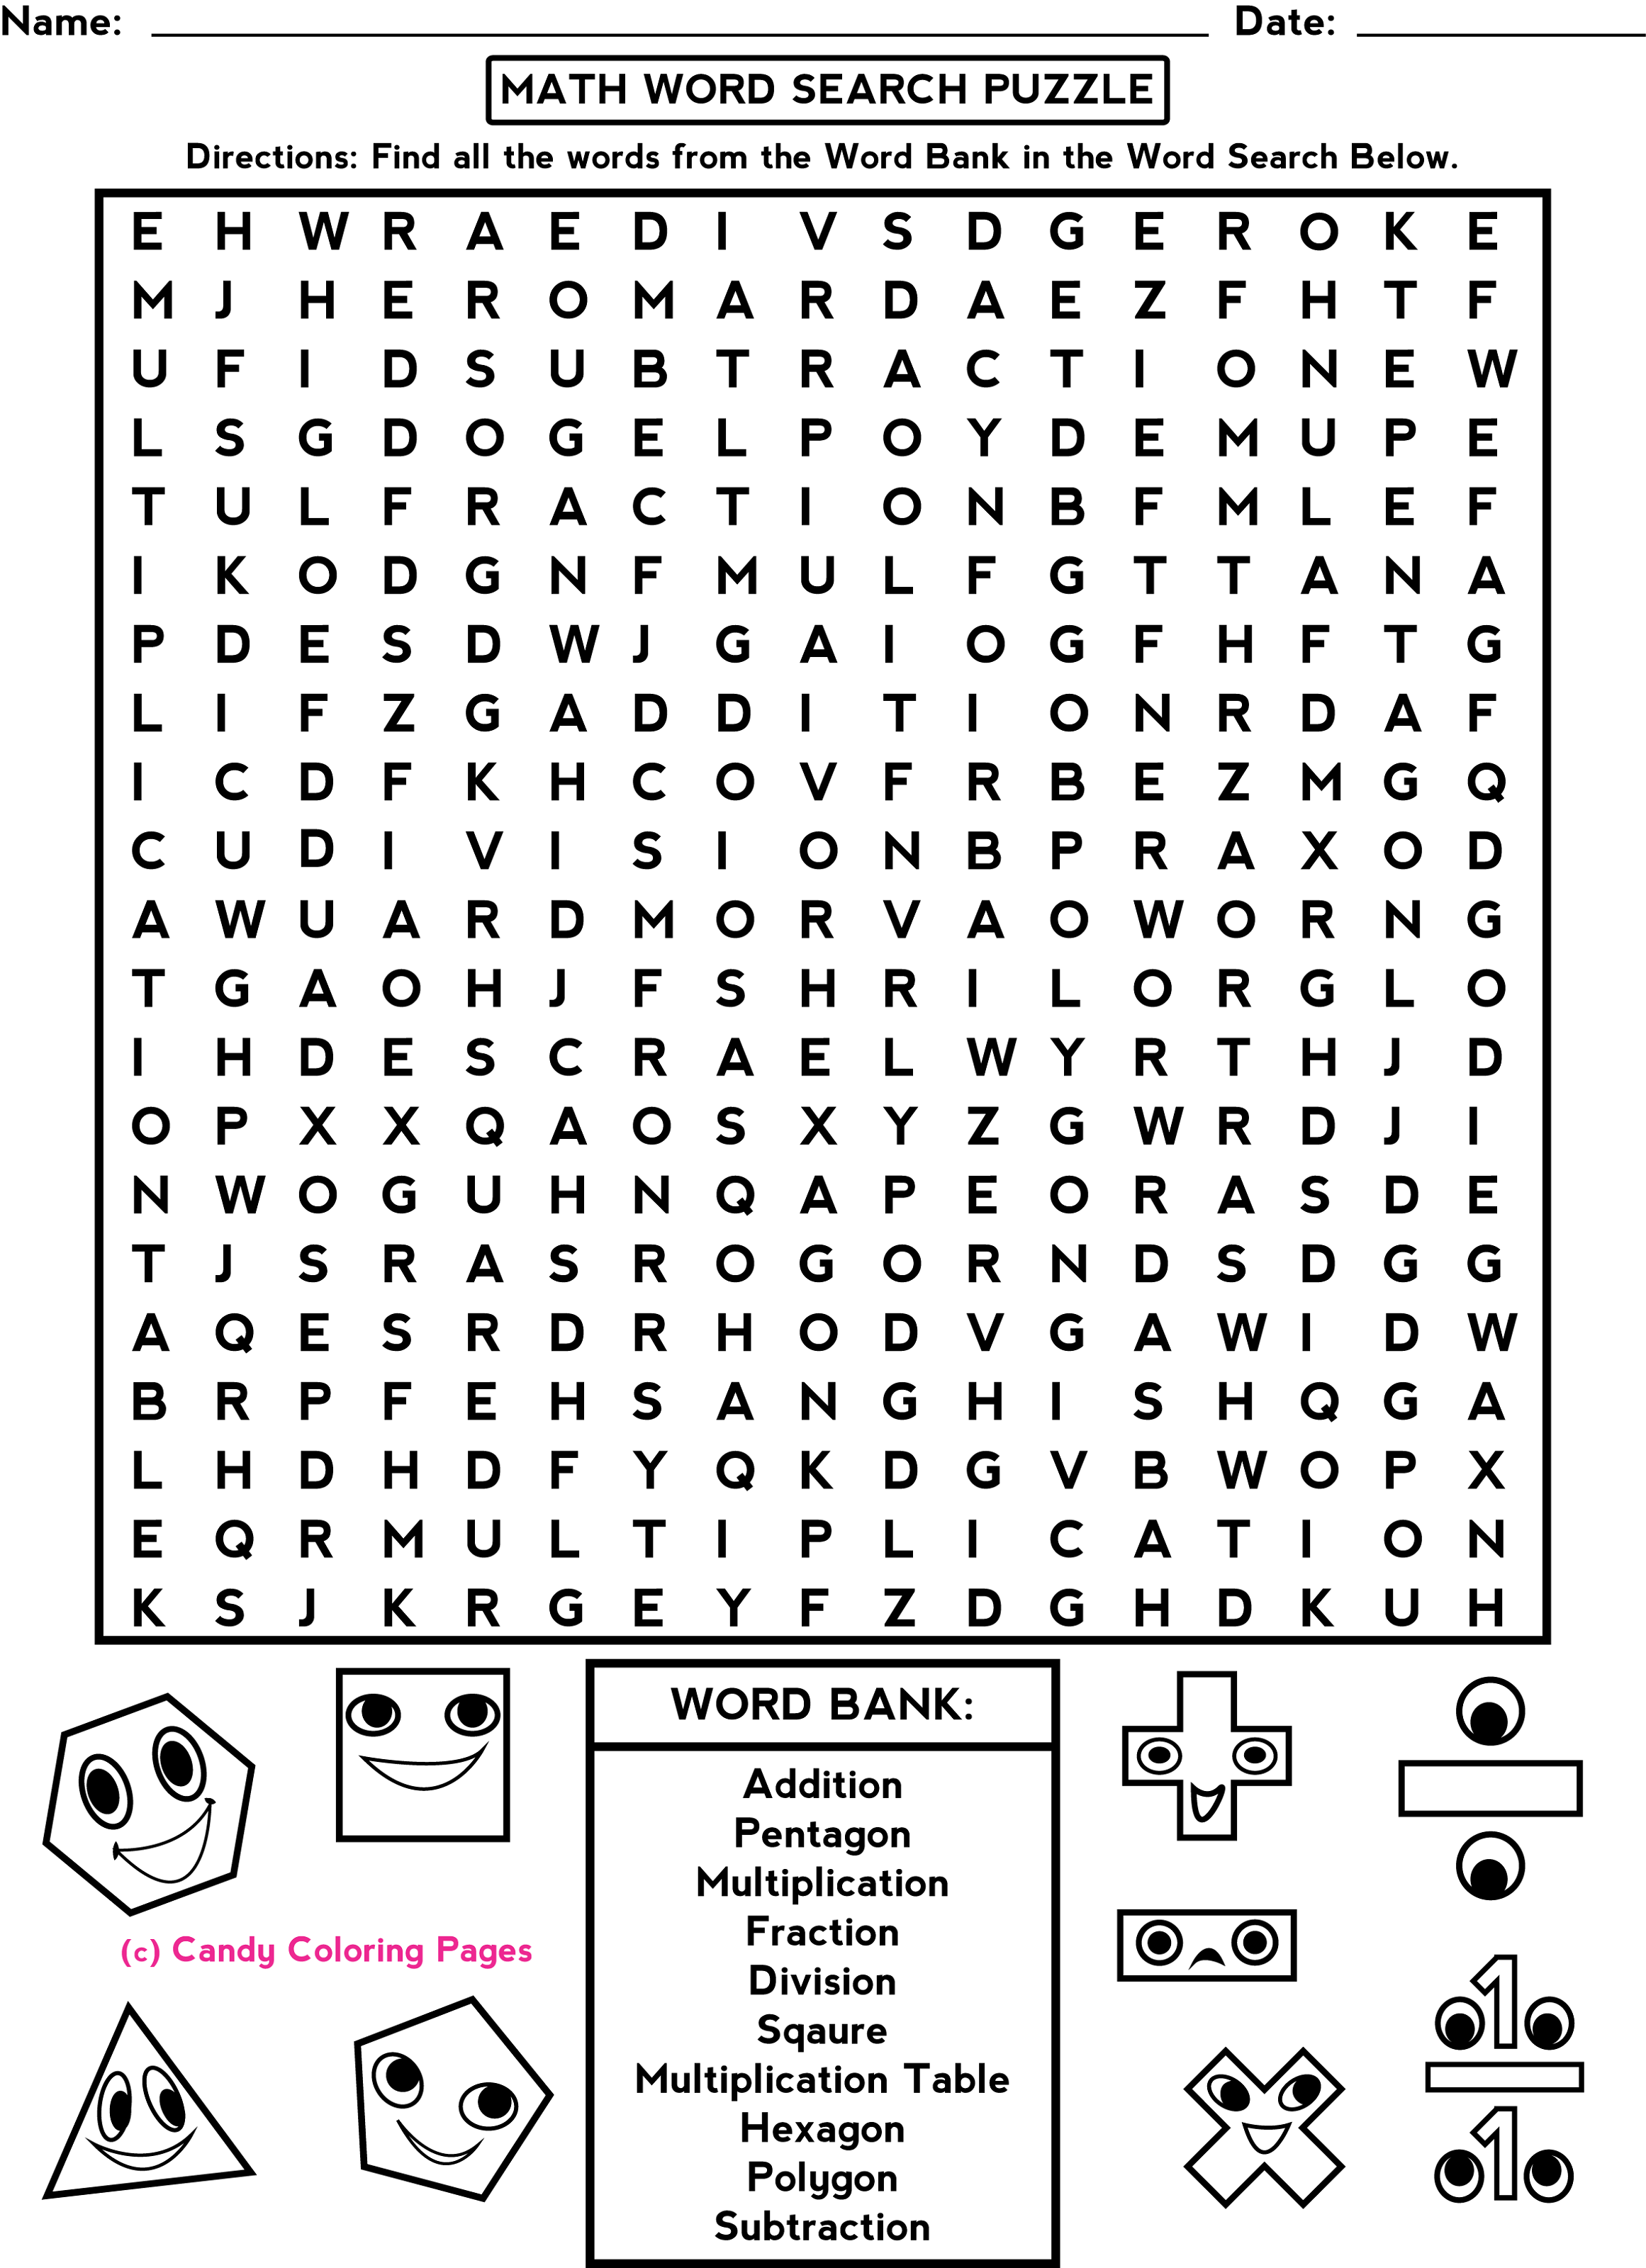 fun sheets for math word search